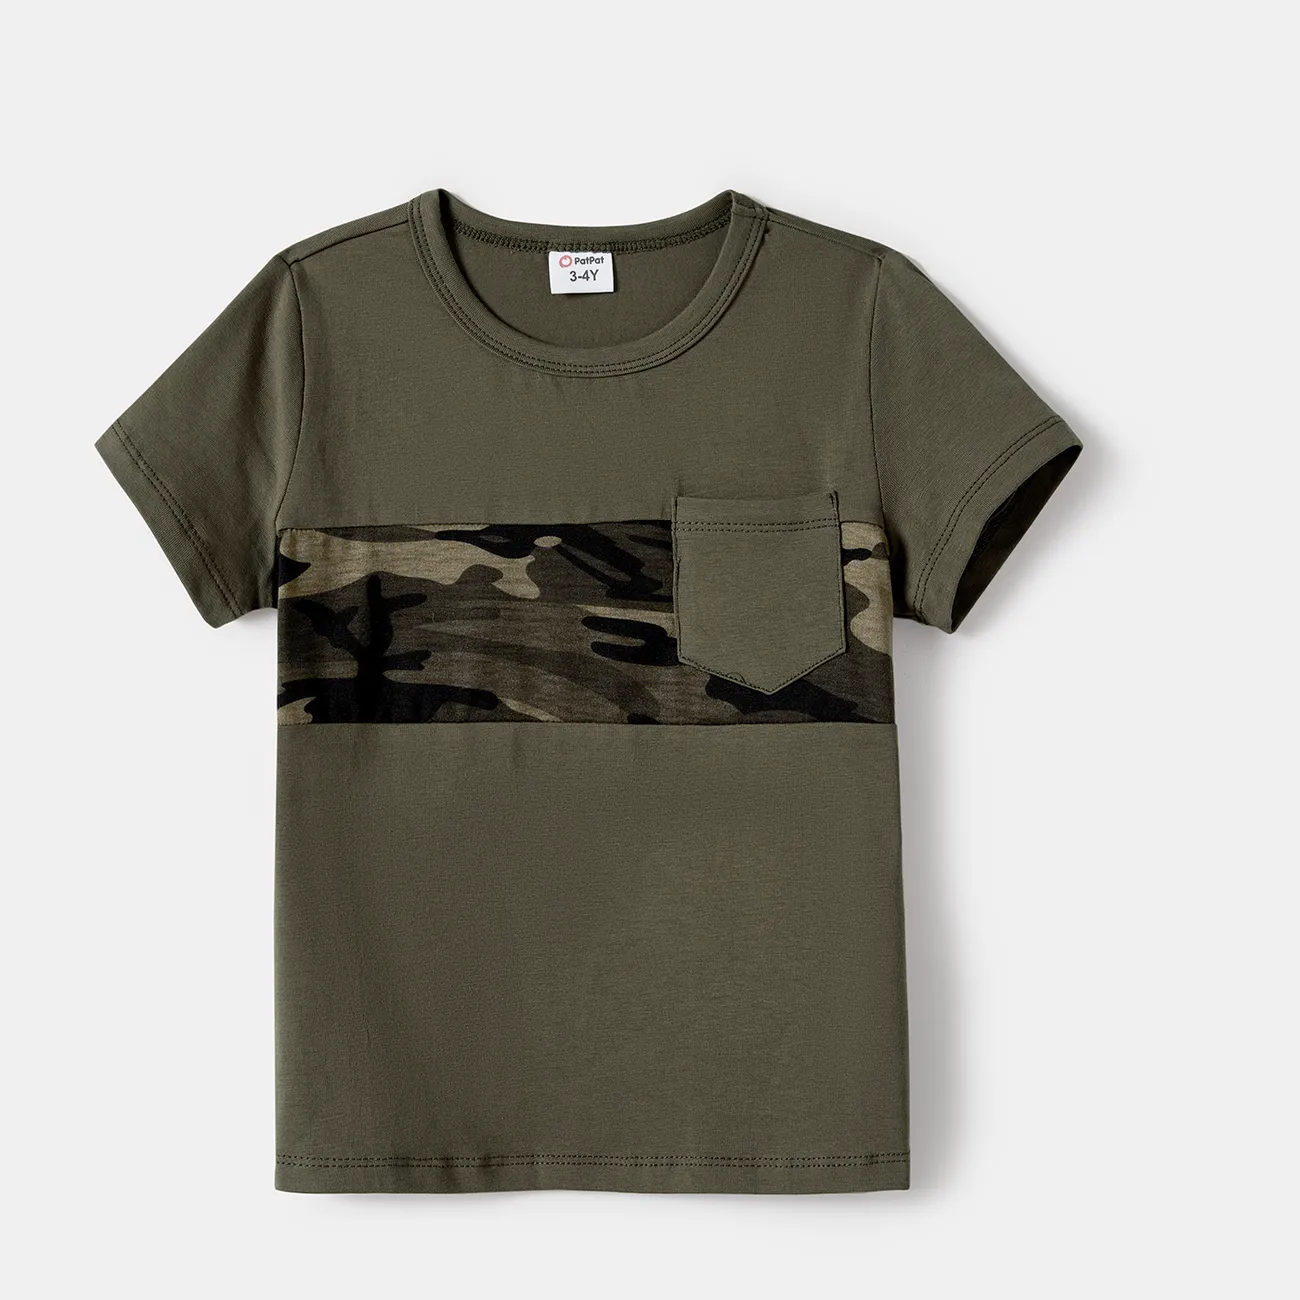 Family Matching Camouflage Tunic Dresses and Patch Pocket T-shirts Sets Army green big image 1